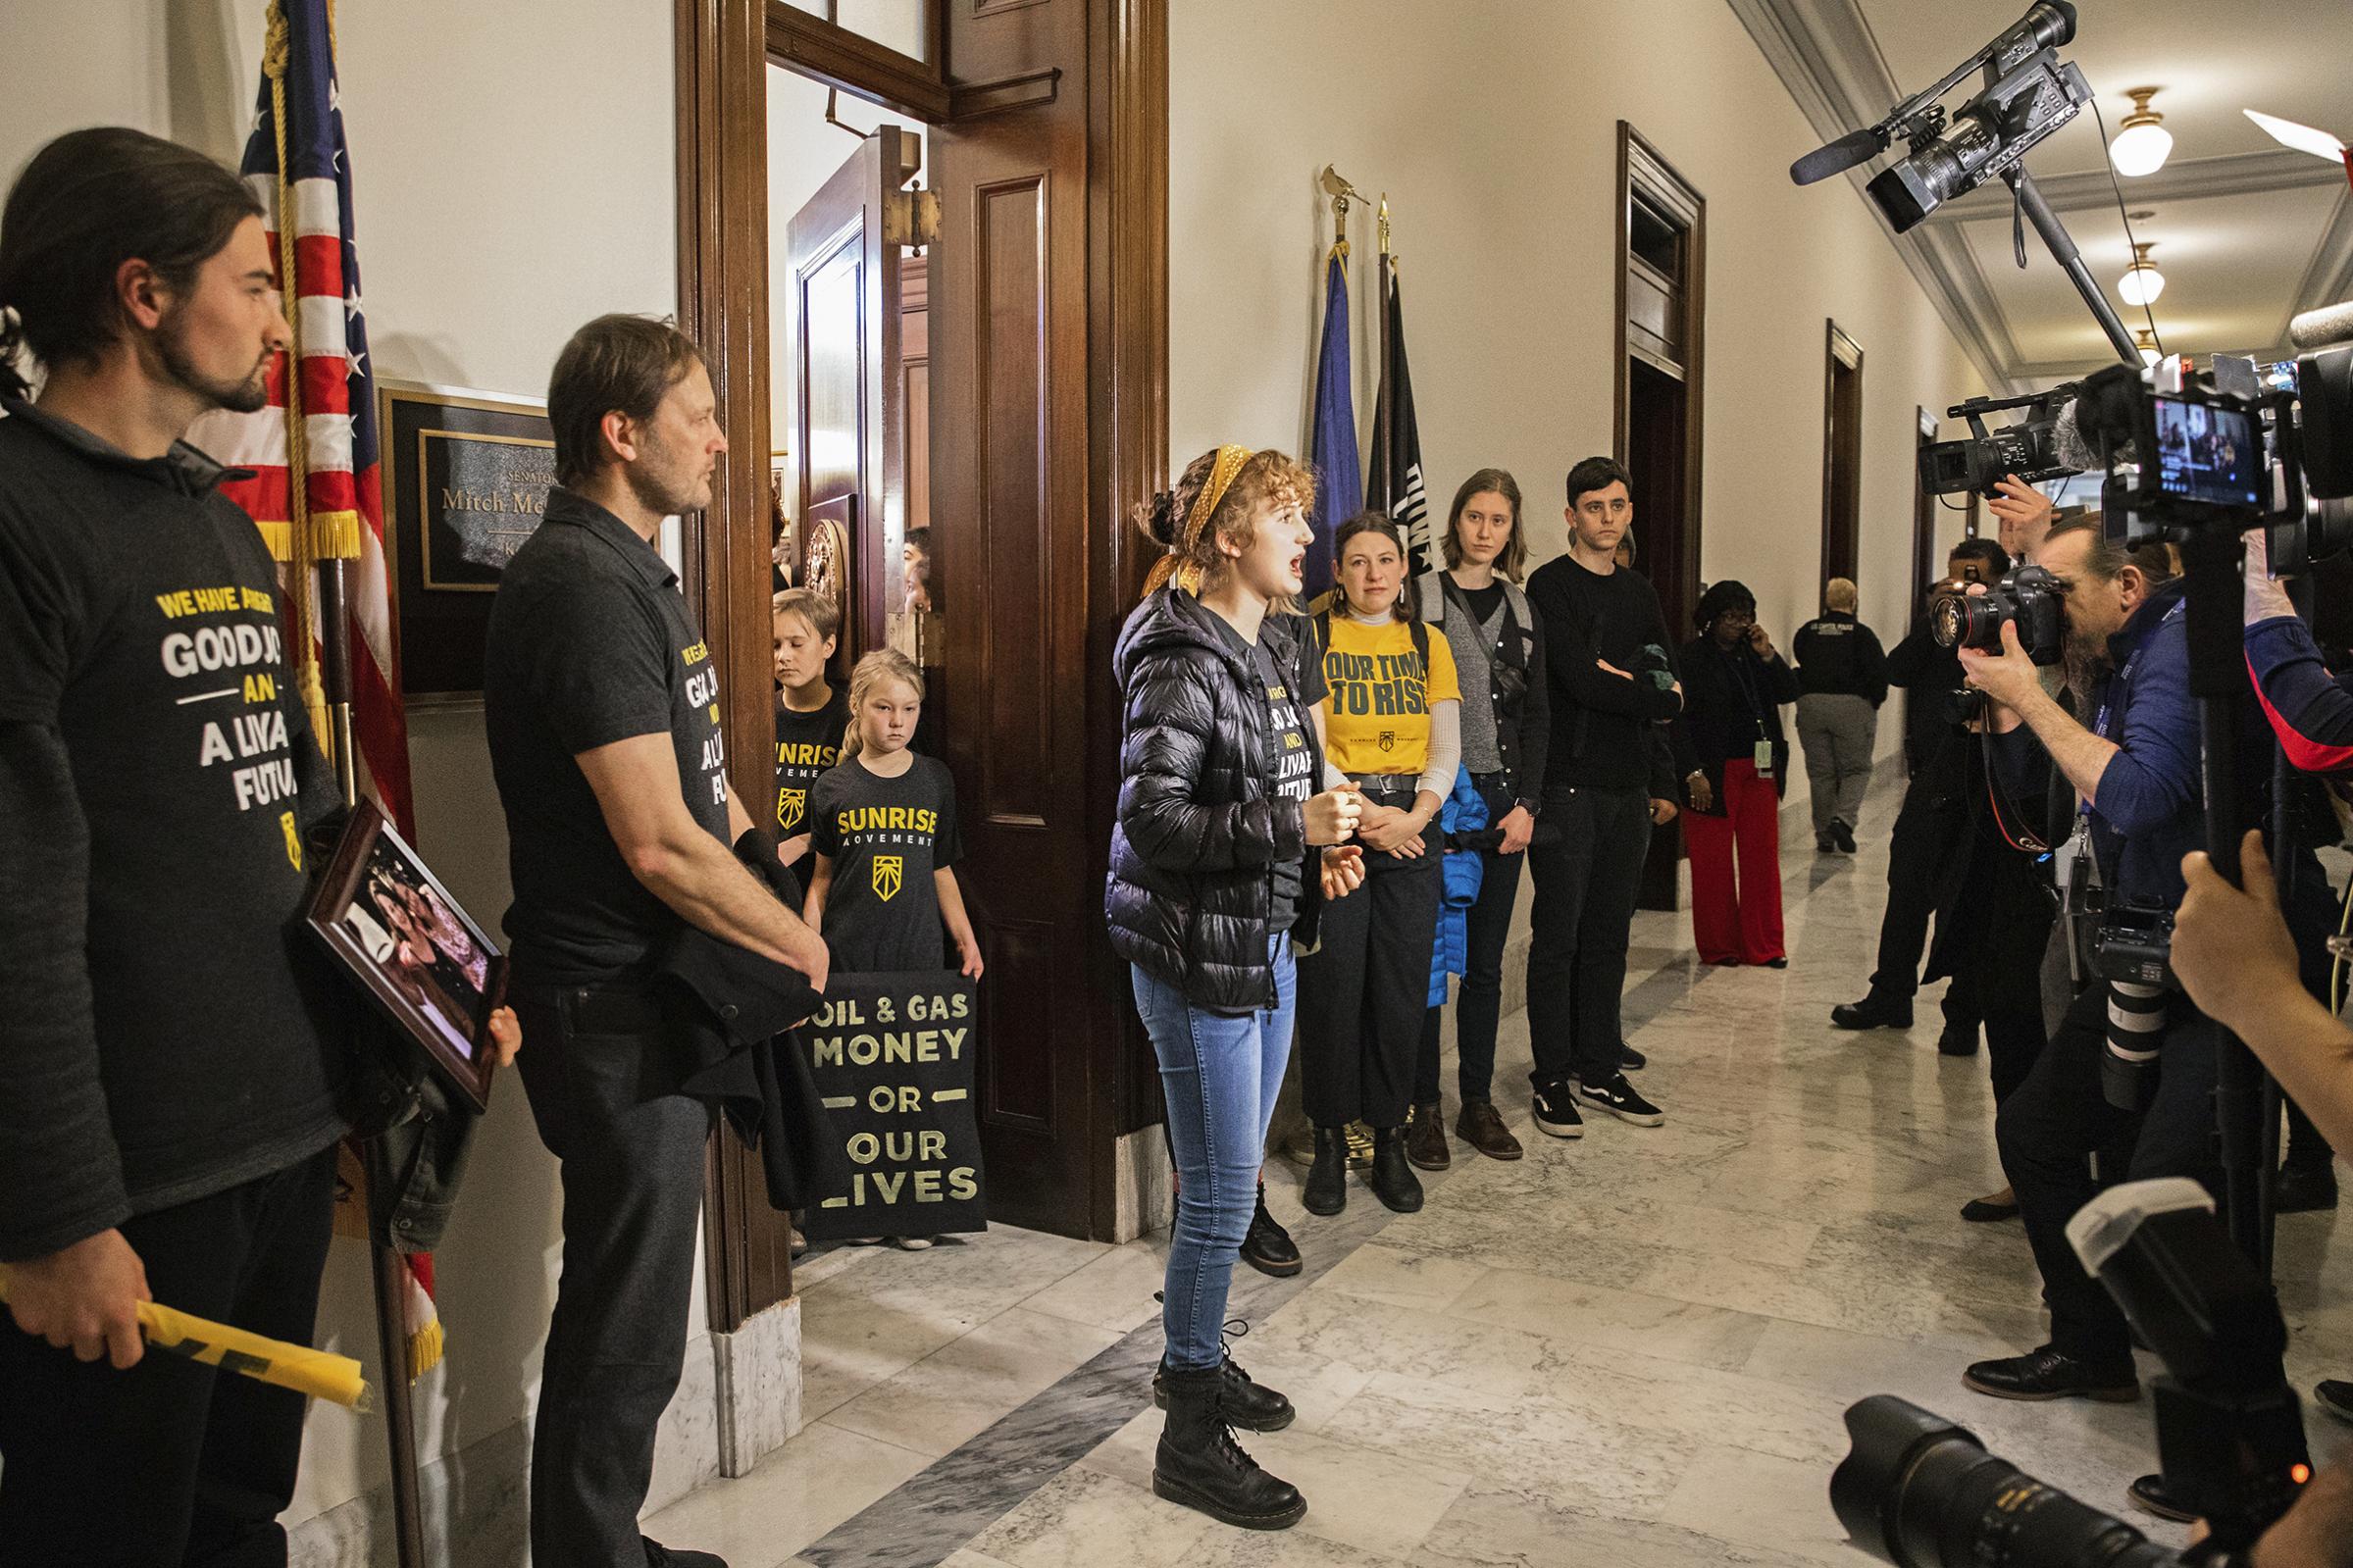 Sunrise Movement activists call for a Green New Deal on Capitol Hill